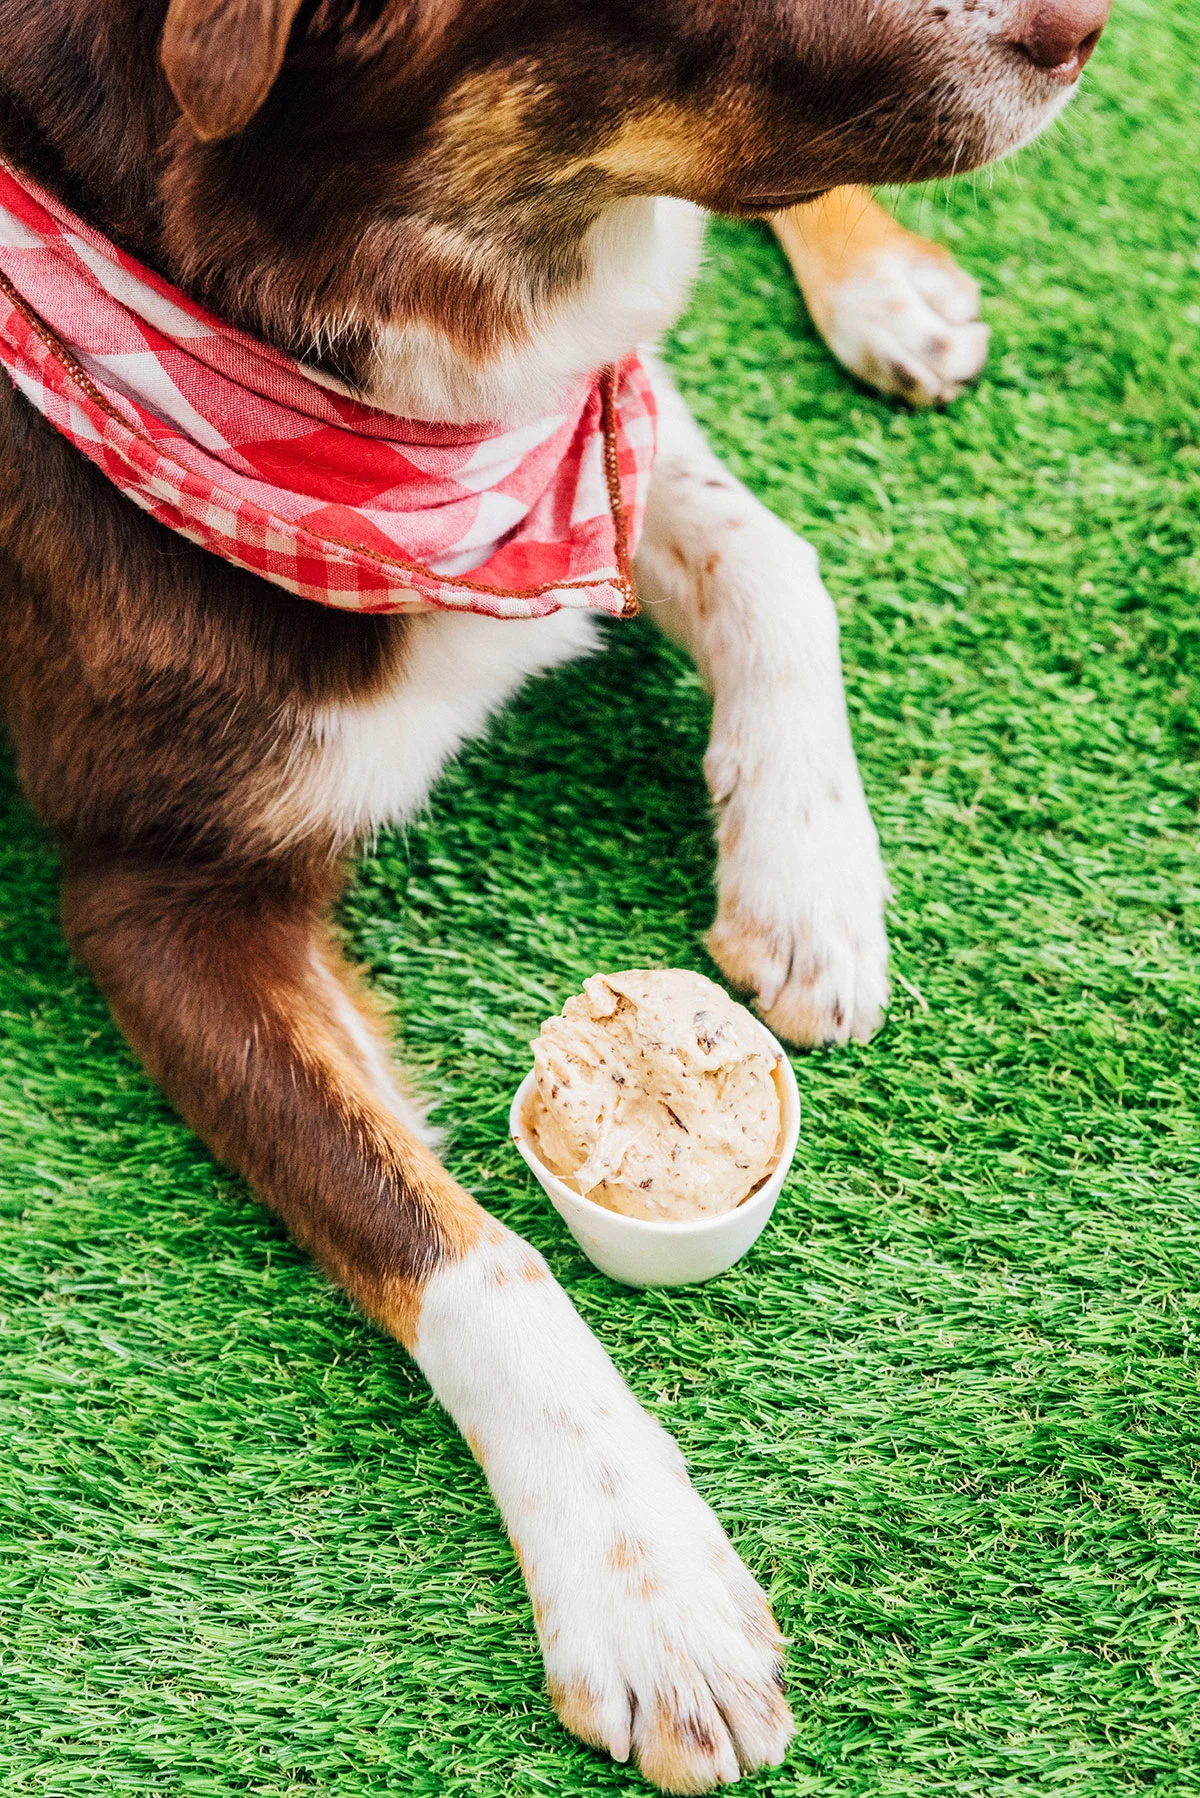 Dog with dog ice cream in a cup between his paws.